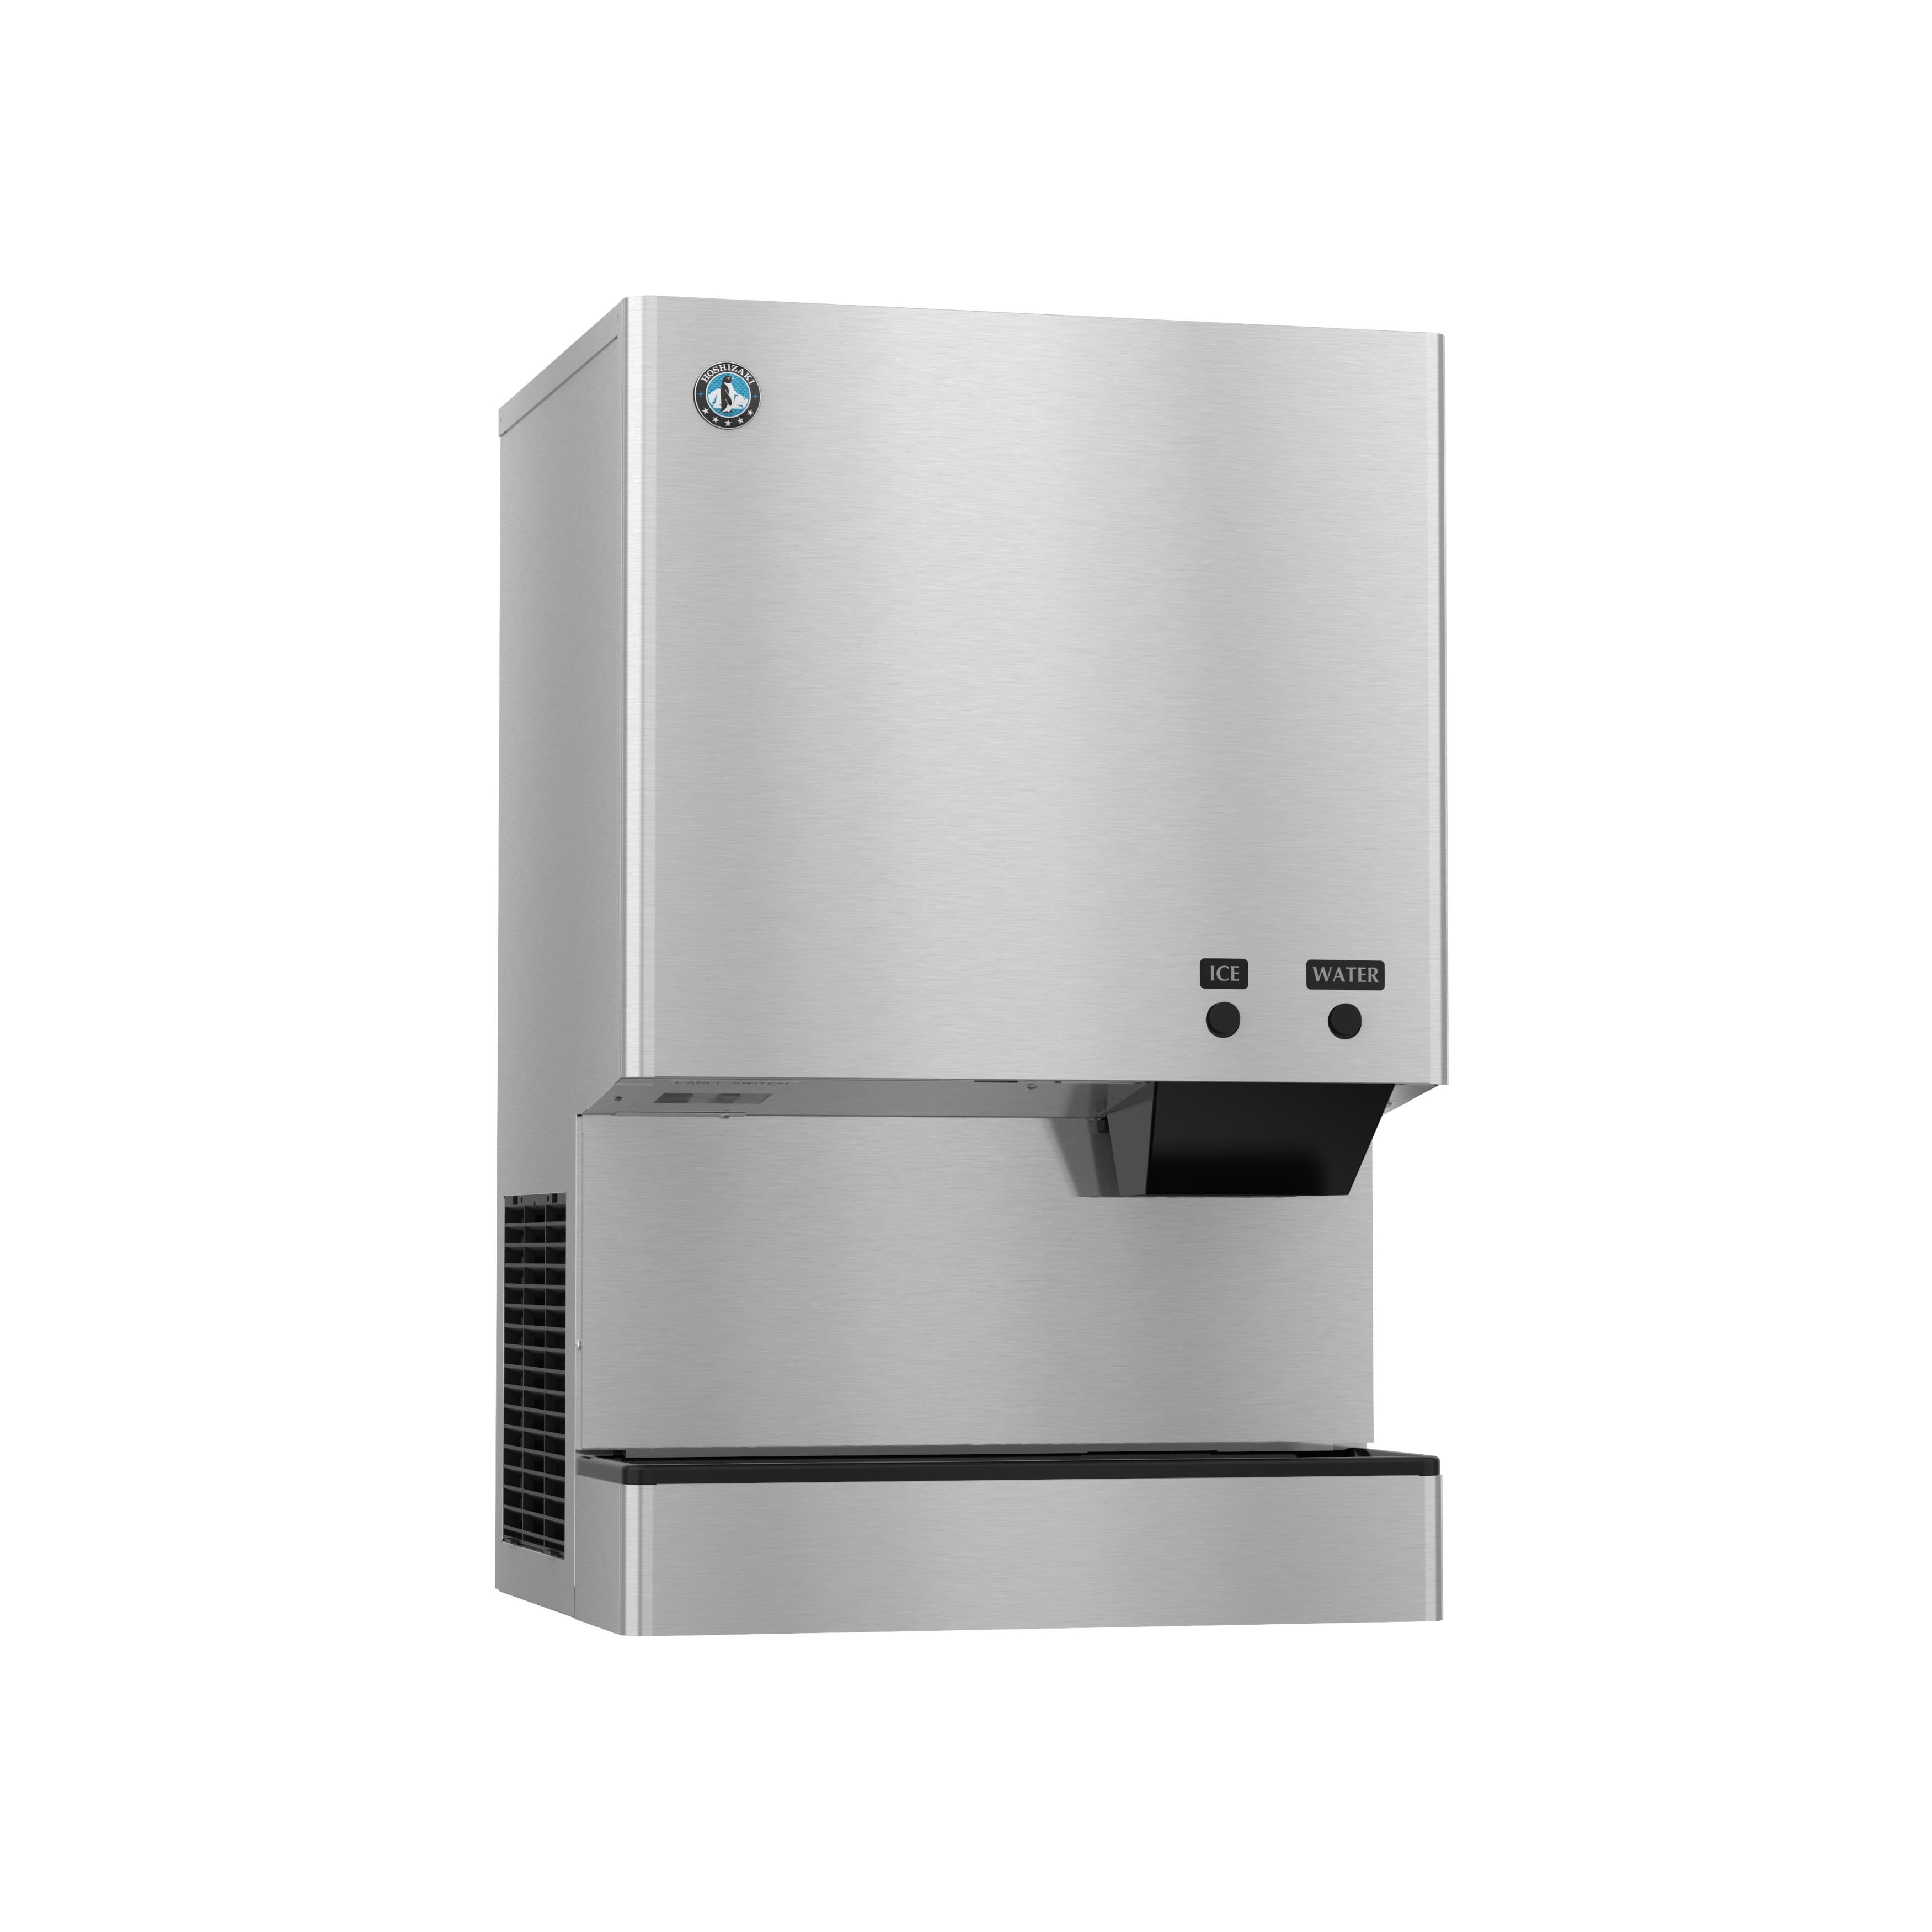 Hoshizaki - DCM-500BAH, Commercial Countertop Ice Maker and Water Dispenser - 40 lb. Storage Air Cooled